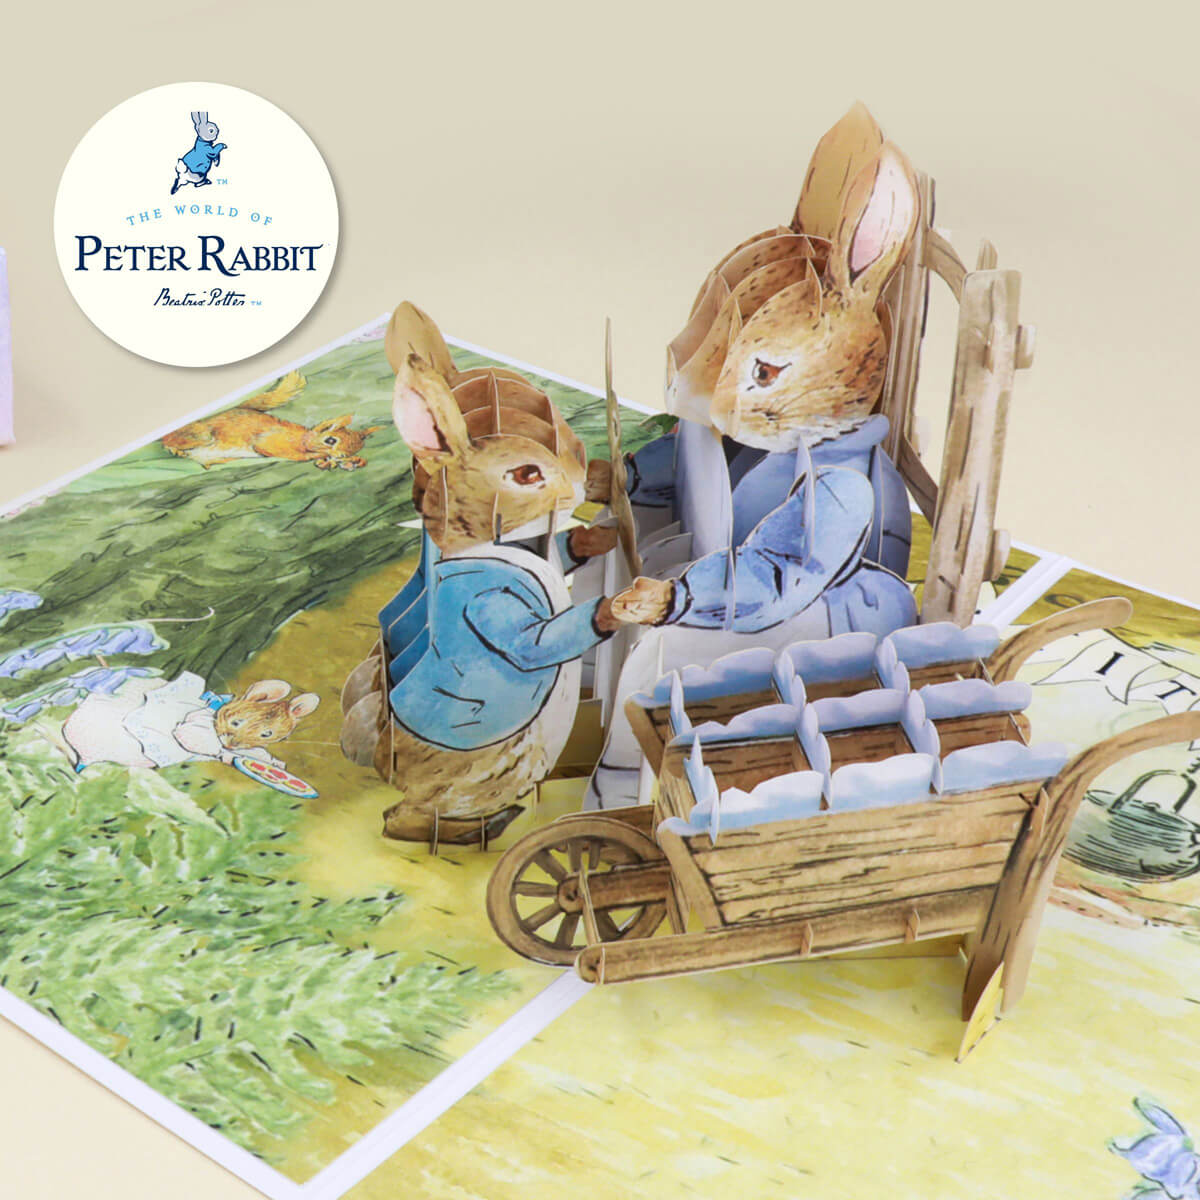 Peter Rabbit New Baby Boy Pop Up Card - Welcome Baby Boy Card - close up Image on a white background